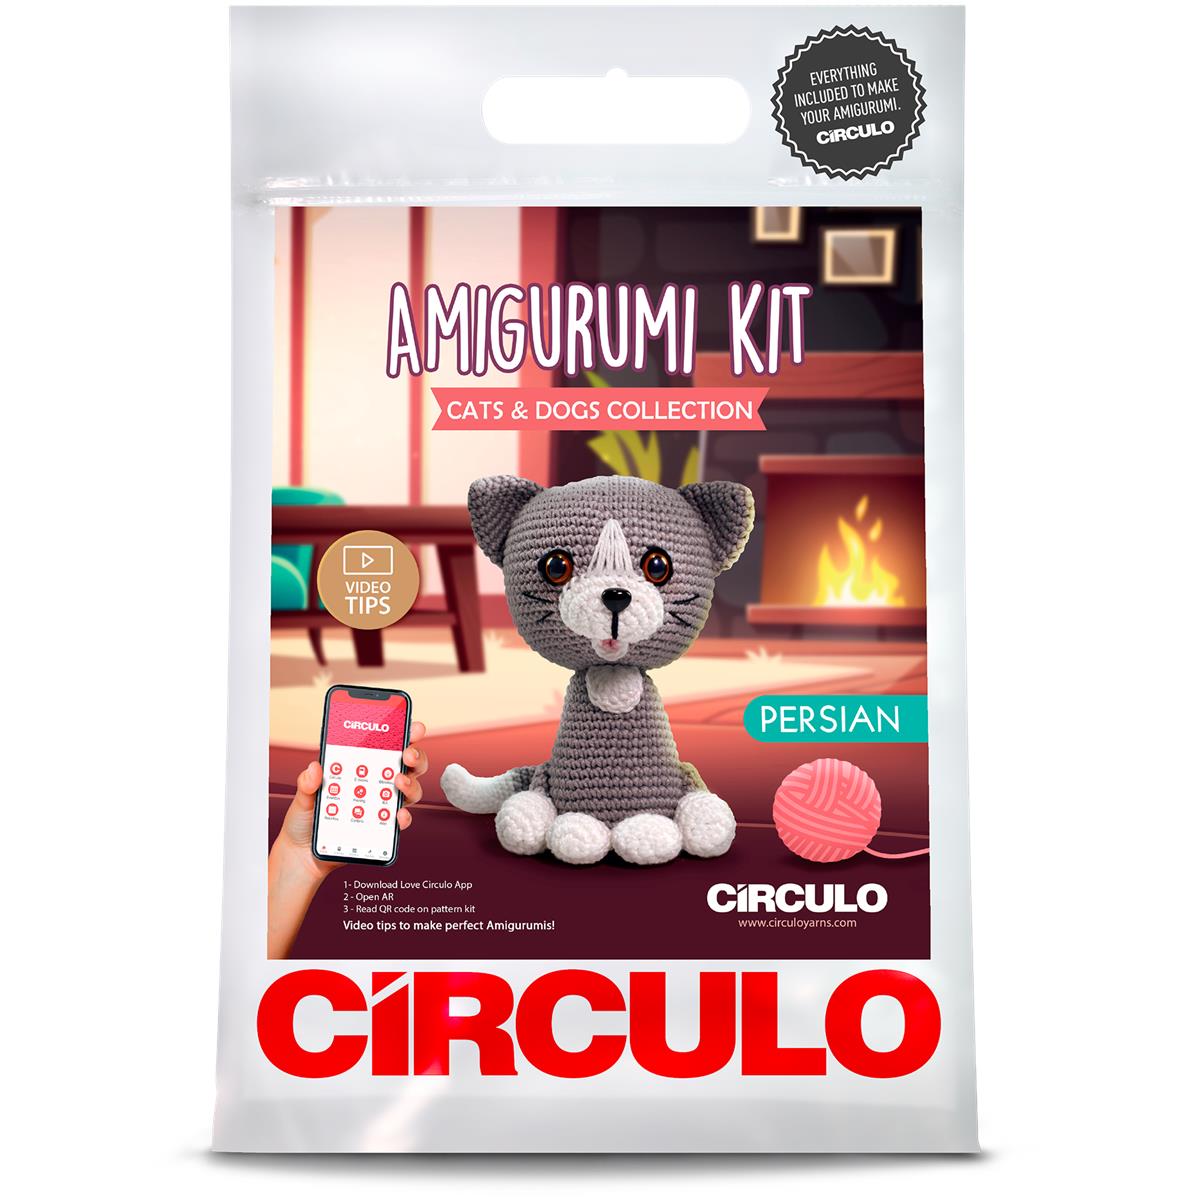 Amigurumi Kit Cats and Dogs by Circulo